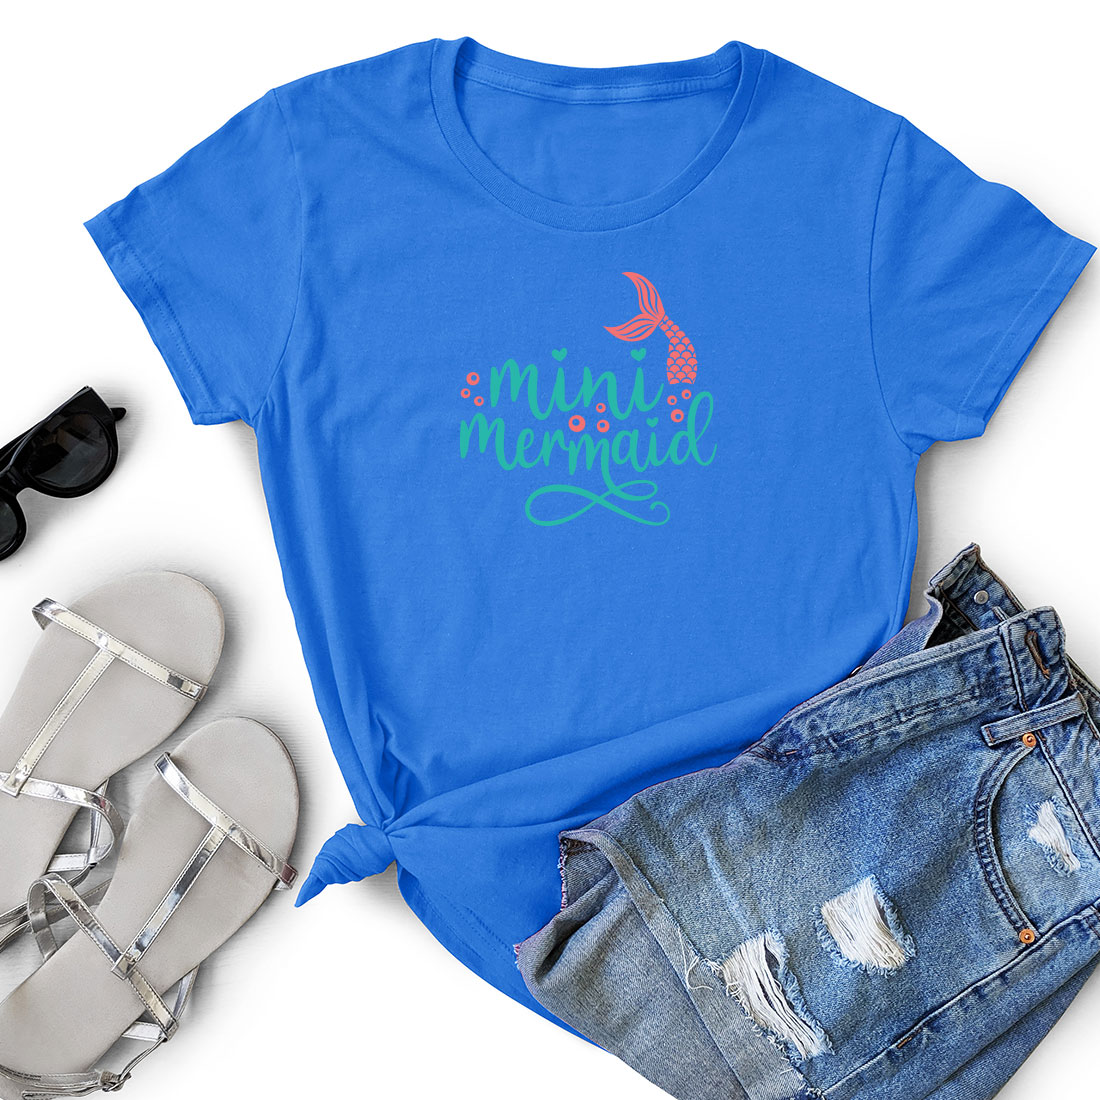 T - shirt with a mermaid design next to a pair of shorts.